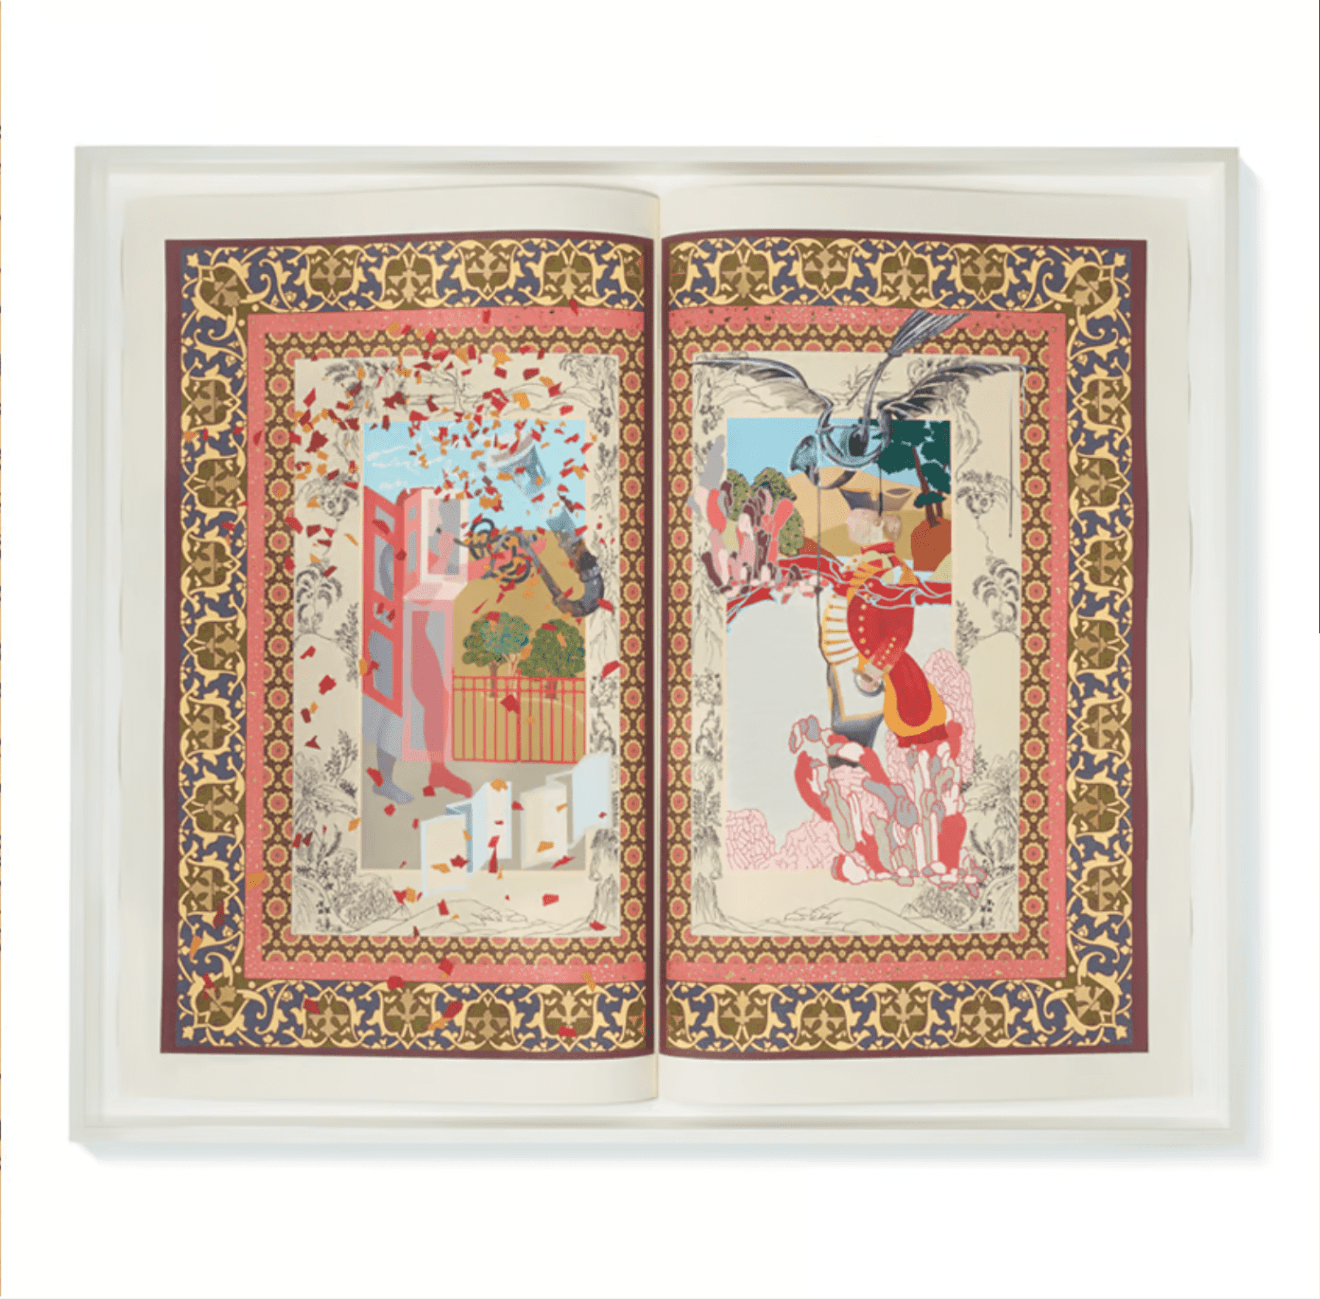 Shahzia Sikander in Beyond the Page: South Asian Miniature Painting and Britain, 1600 to Now